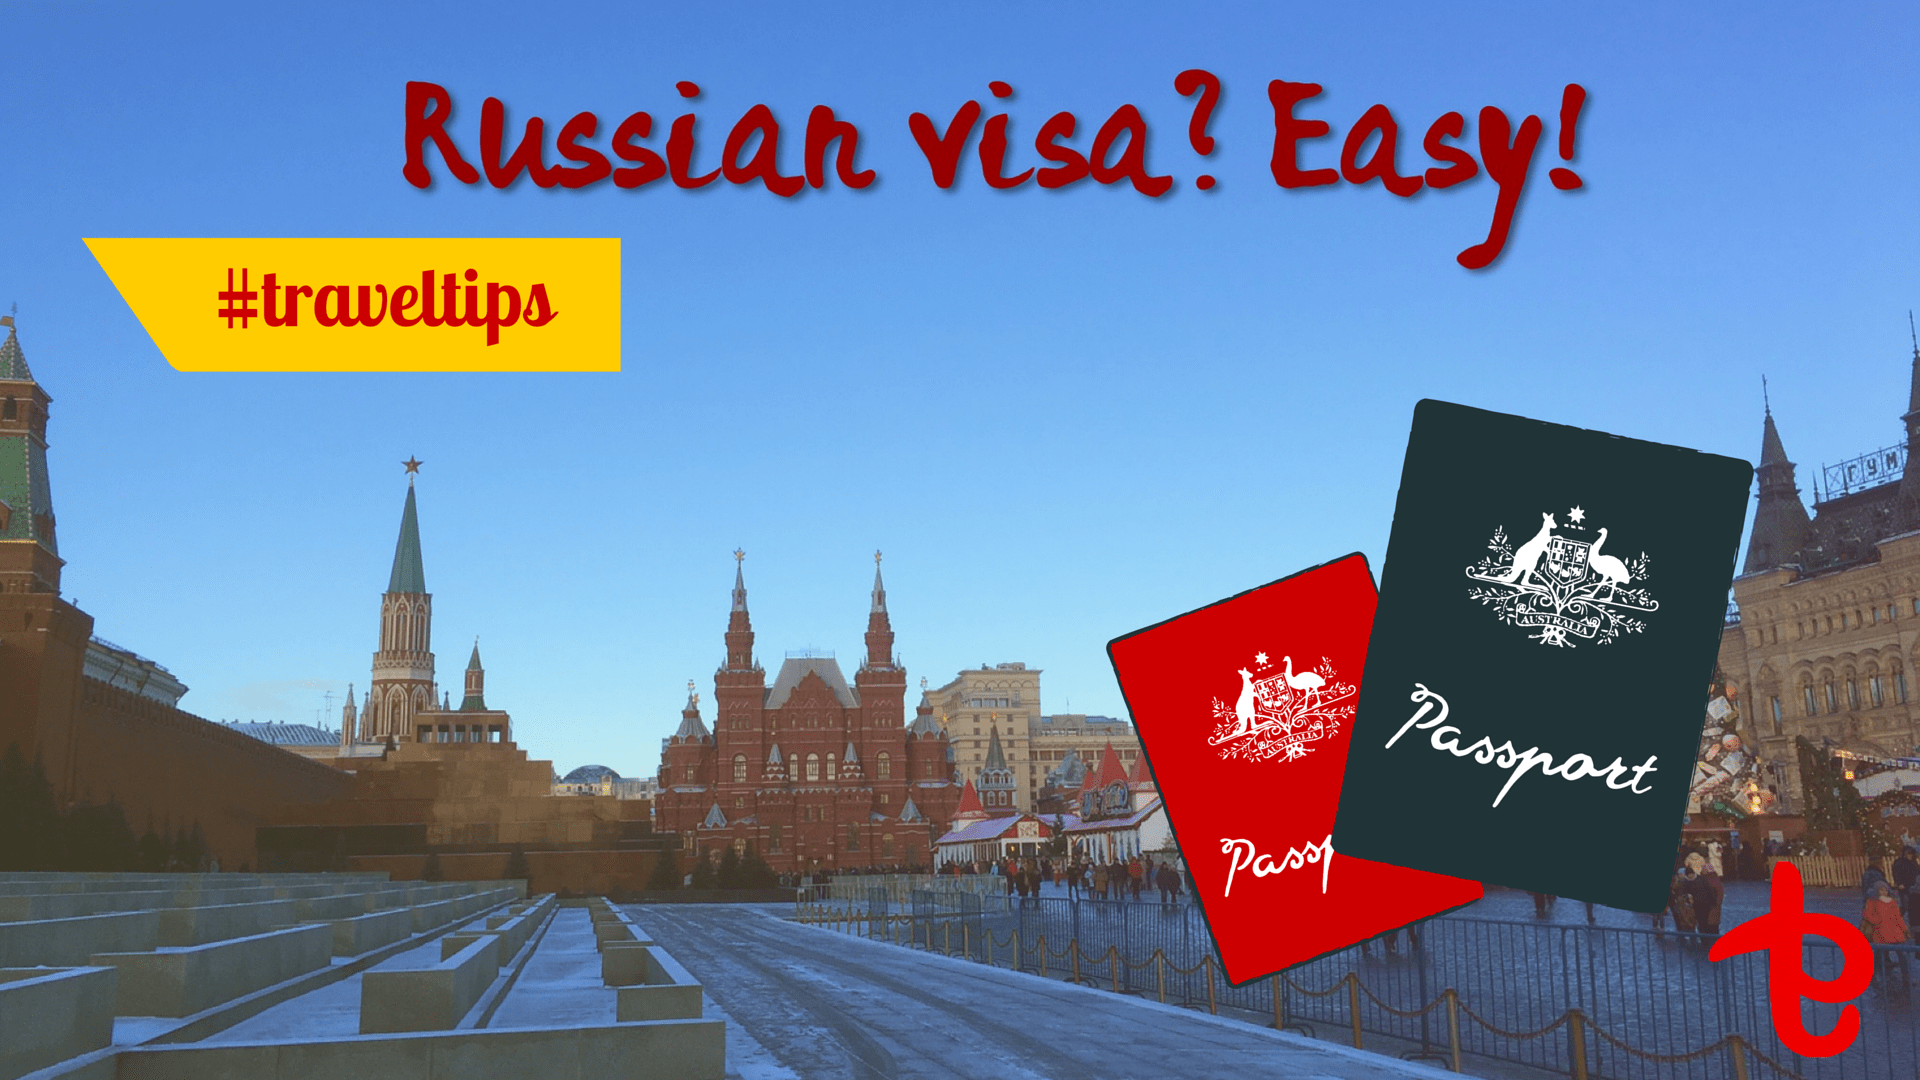 Russian visa policy in 2021 or how to visit Russia without a visa?